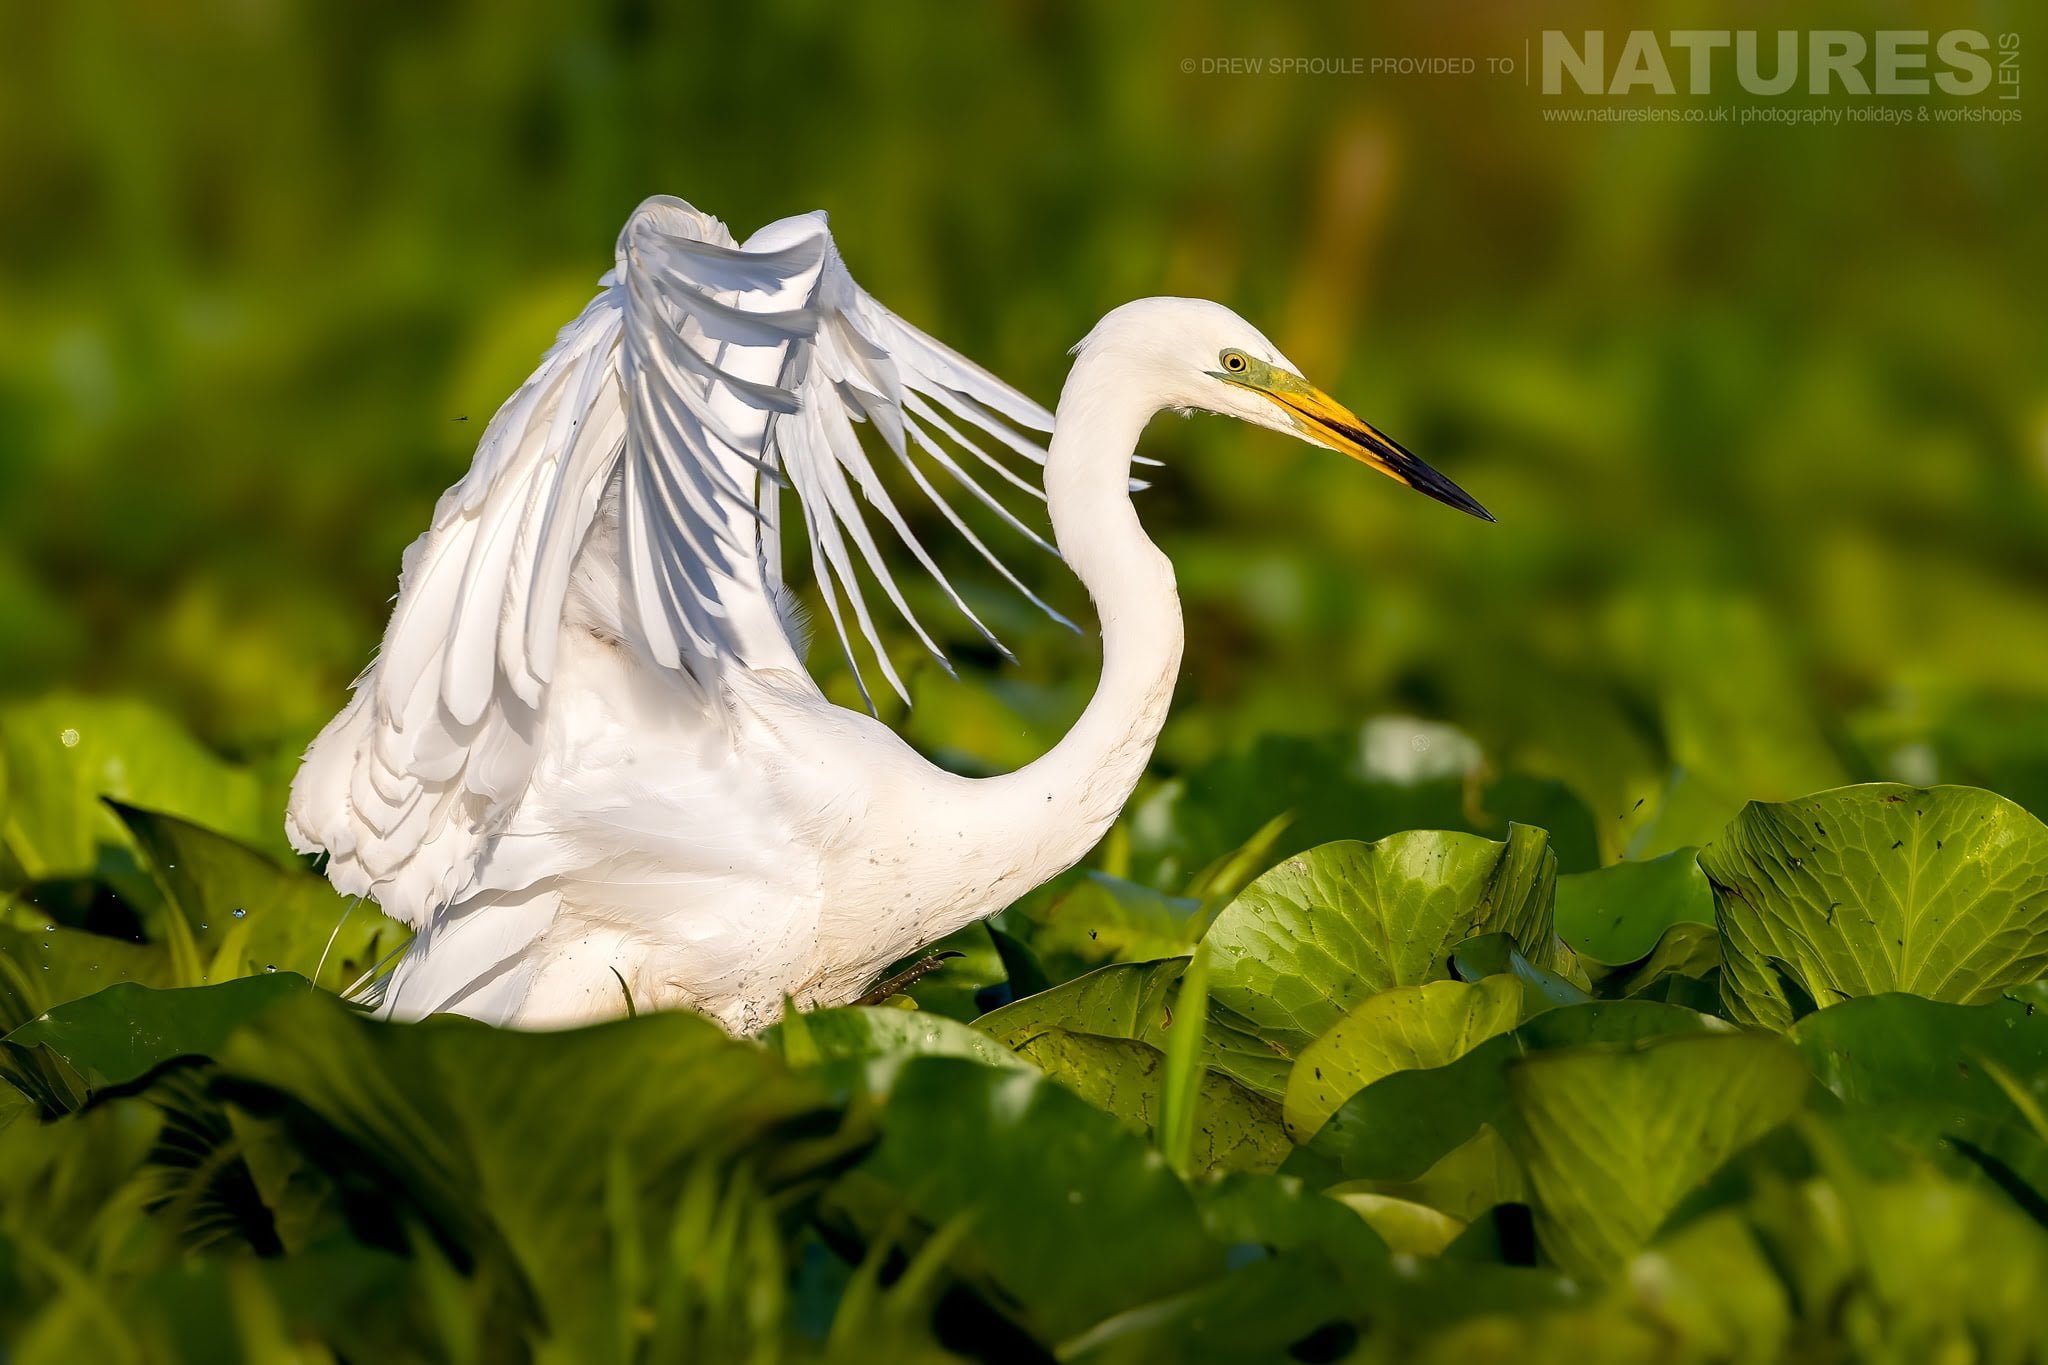 A Great White Egret Fishing Typical Of The Kind Of Image You Will Capture During The Birdlife Of The Danube Delta Photography Trip